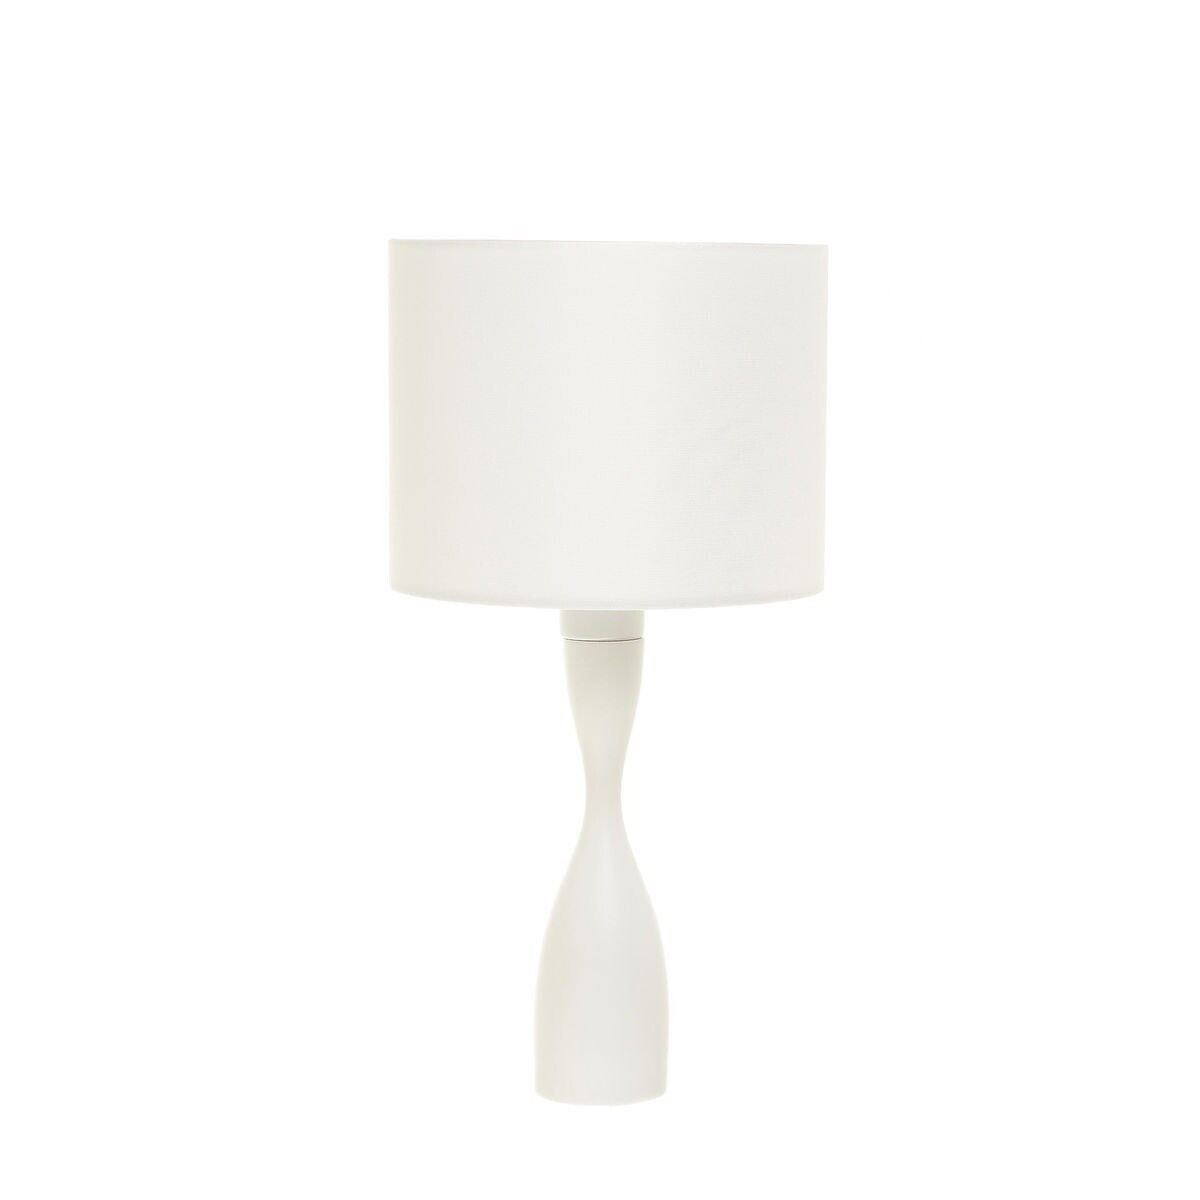 Clelia table lamp, White, large image number 0